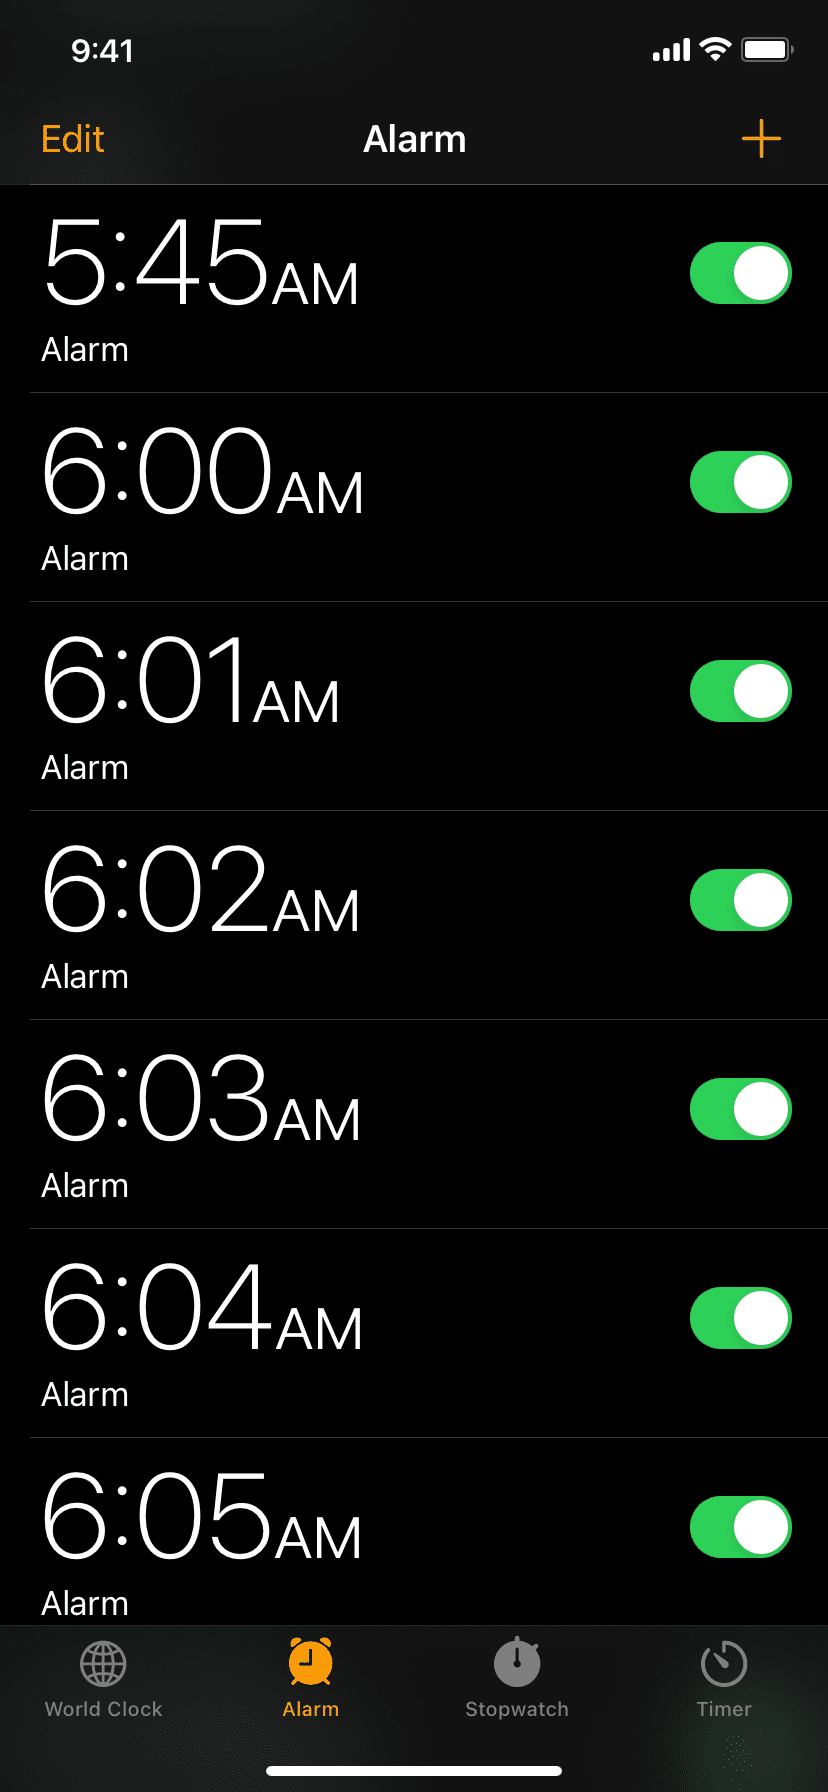 Many alarms set on iPhone